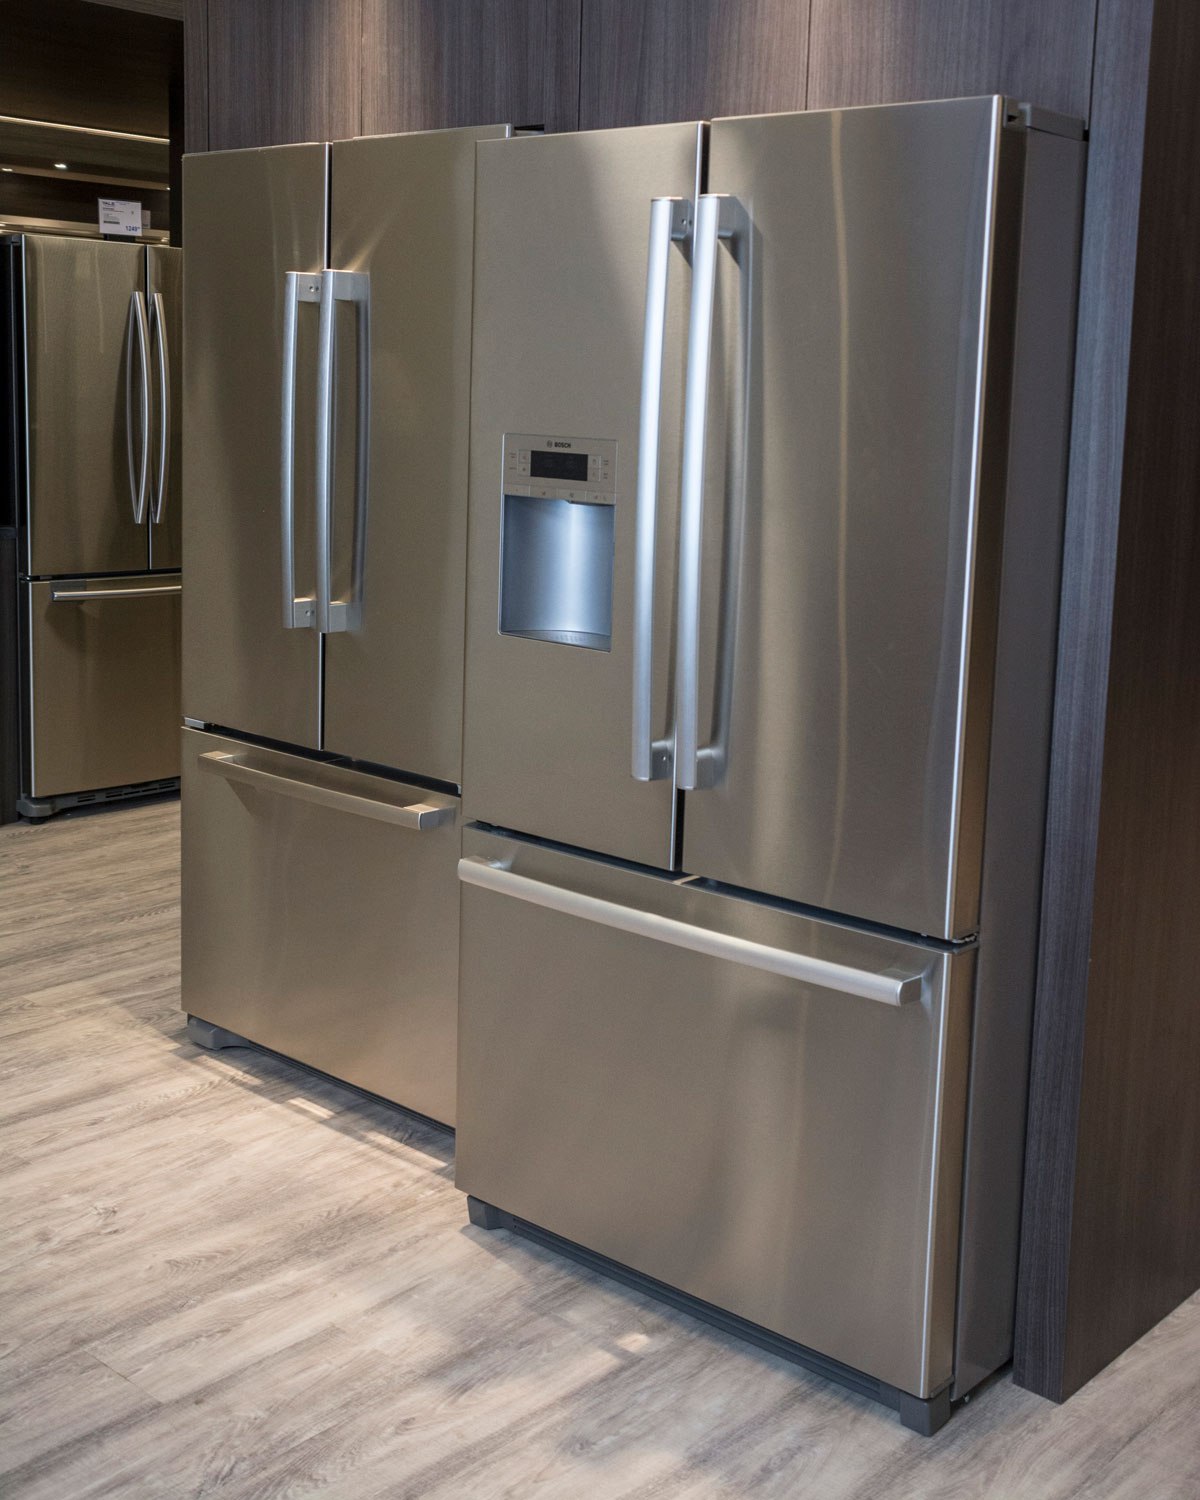 The 7 Best Counter Depth Refrigerators for 2019 (Reviews / Ratings ...